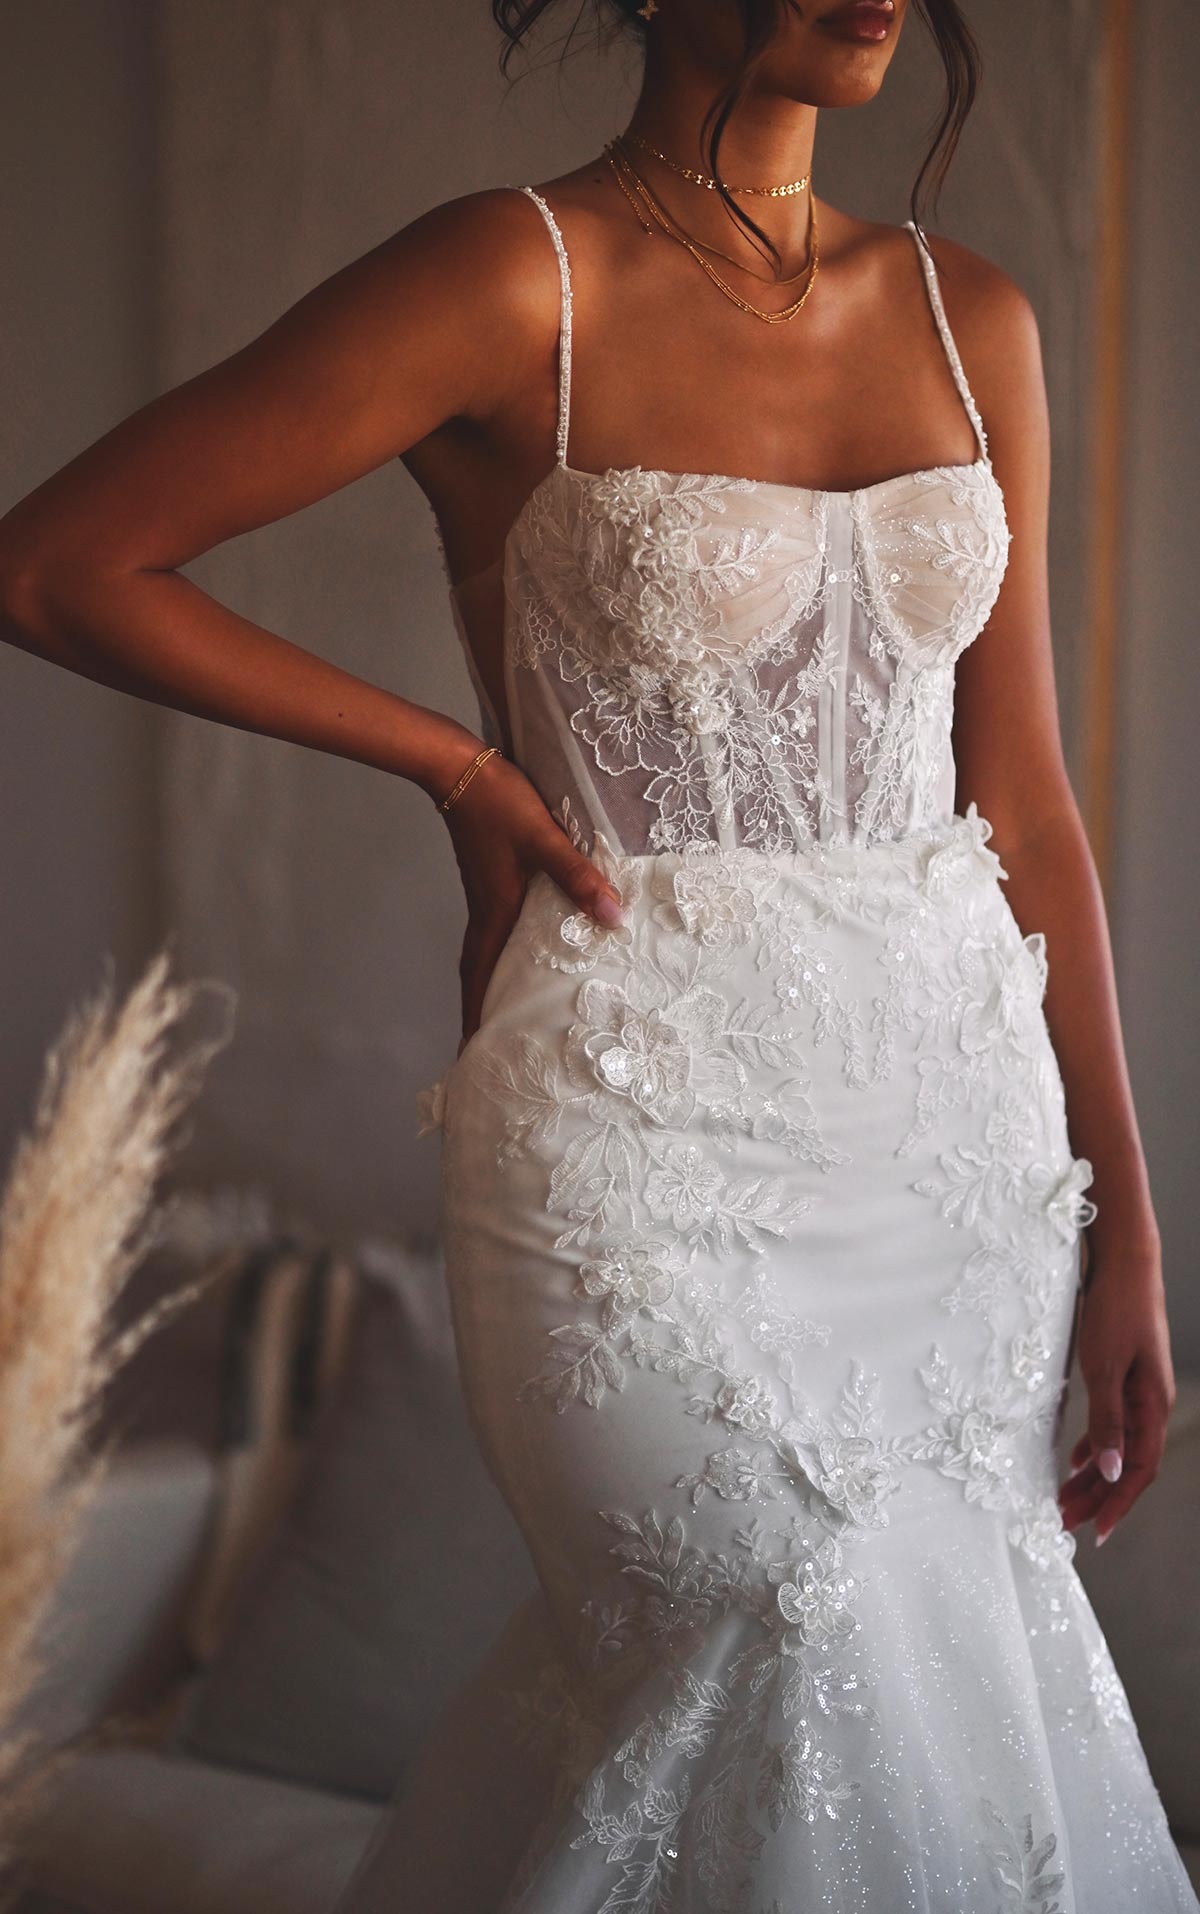 Wedding Gowns for Busty Ladies, Bridal Dresses for Big Bust Brides